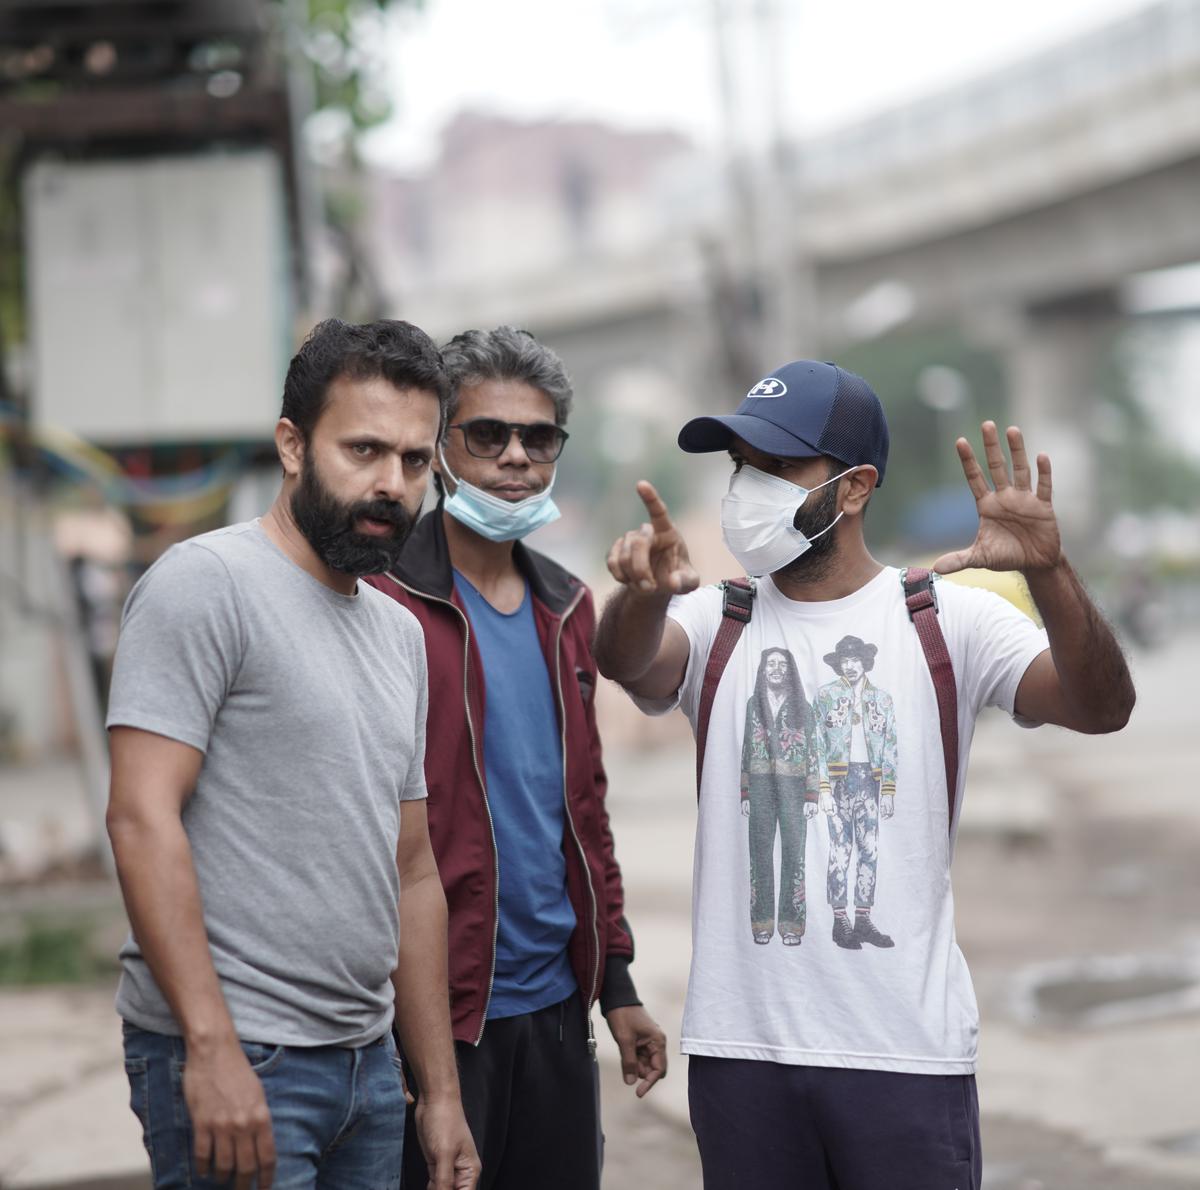 Vineeth Kumar (left) with cinematographers Sameer Thahir and Shyju Khalid, who are also producers of 'Dear Friend'